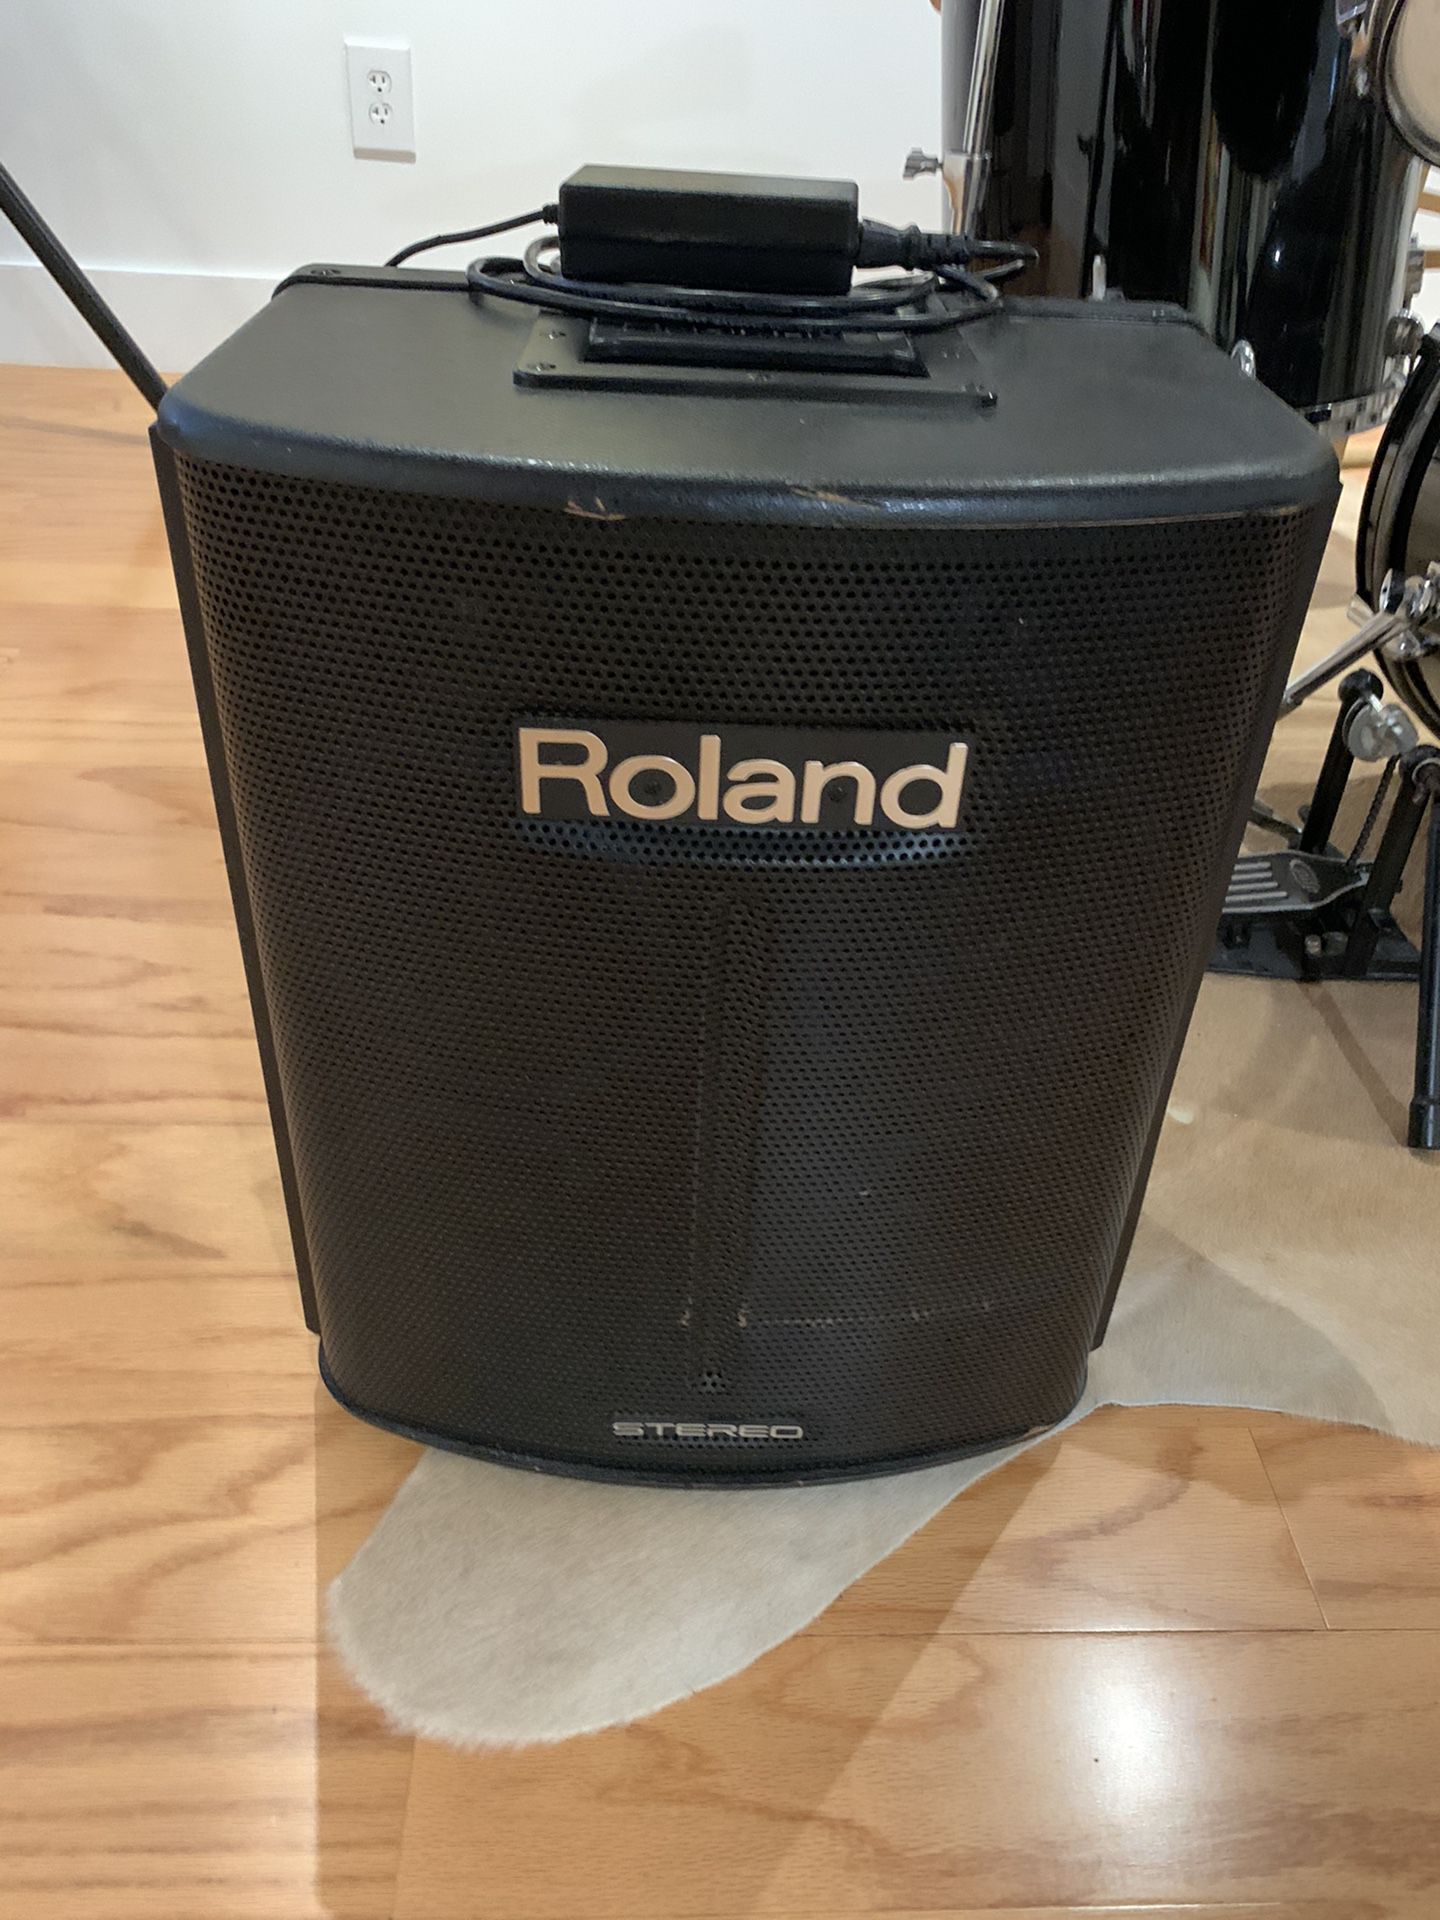 Roland Amplified Portable speaker Bluetooth  System, Battery Power 